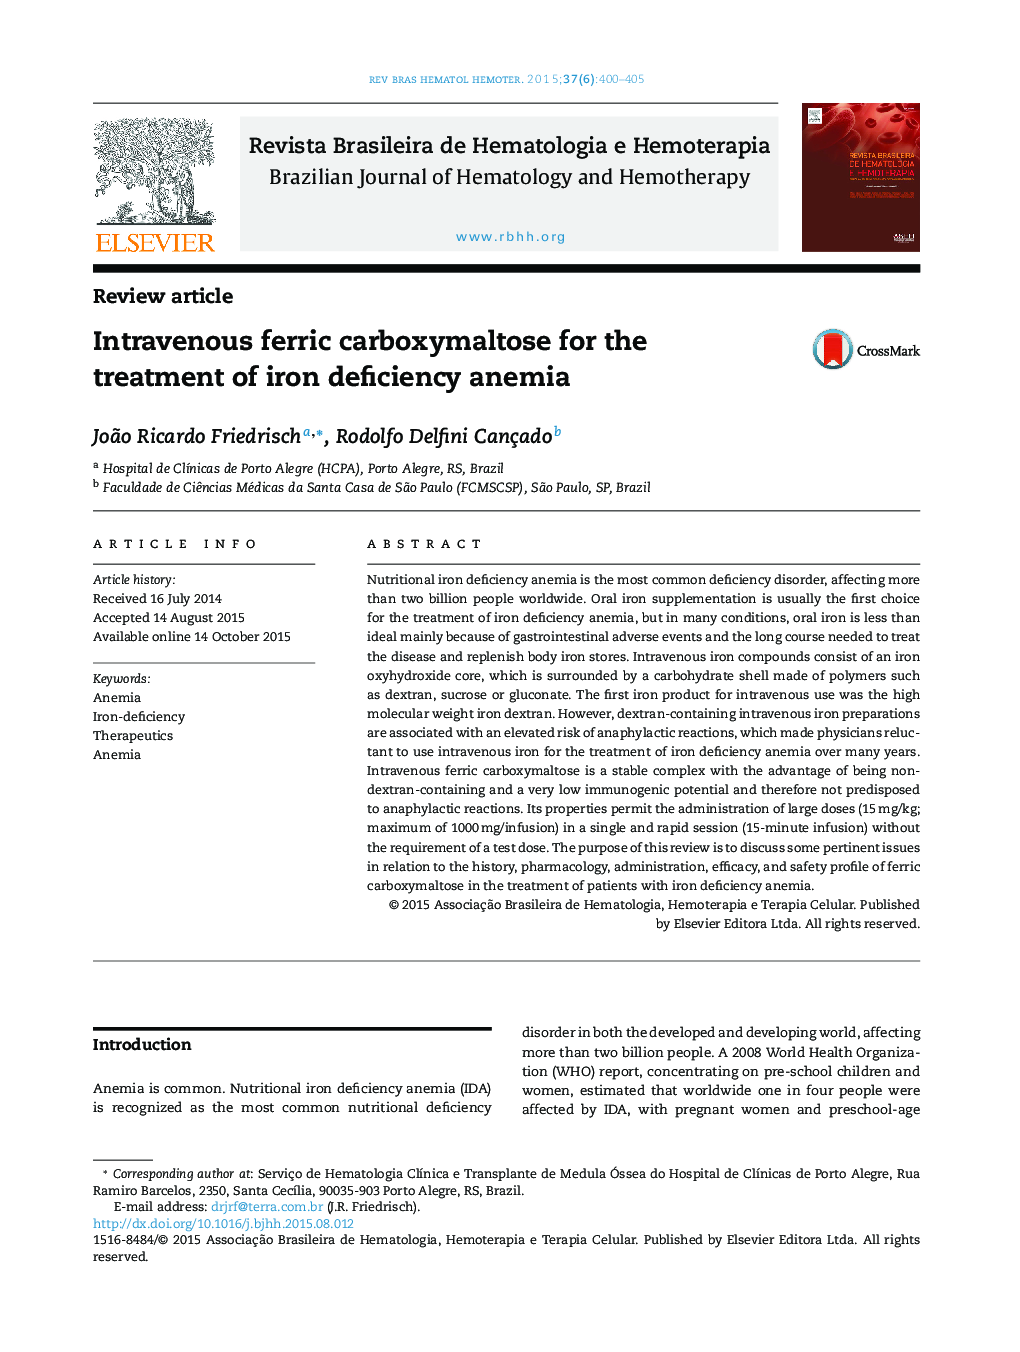 Intravenous ferric carboxymaltose for the treatment of iron deficiency anemia